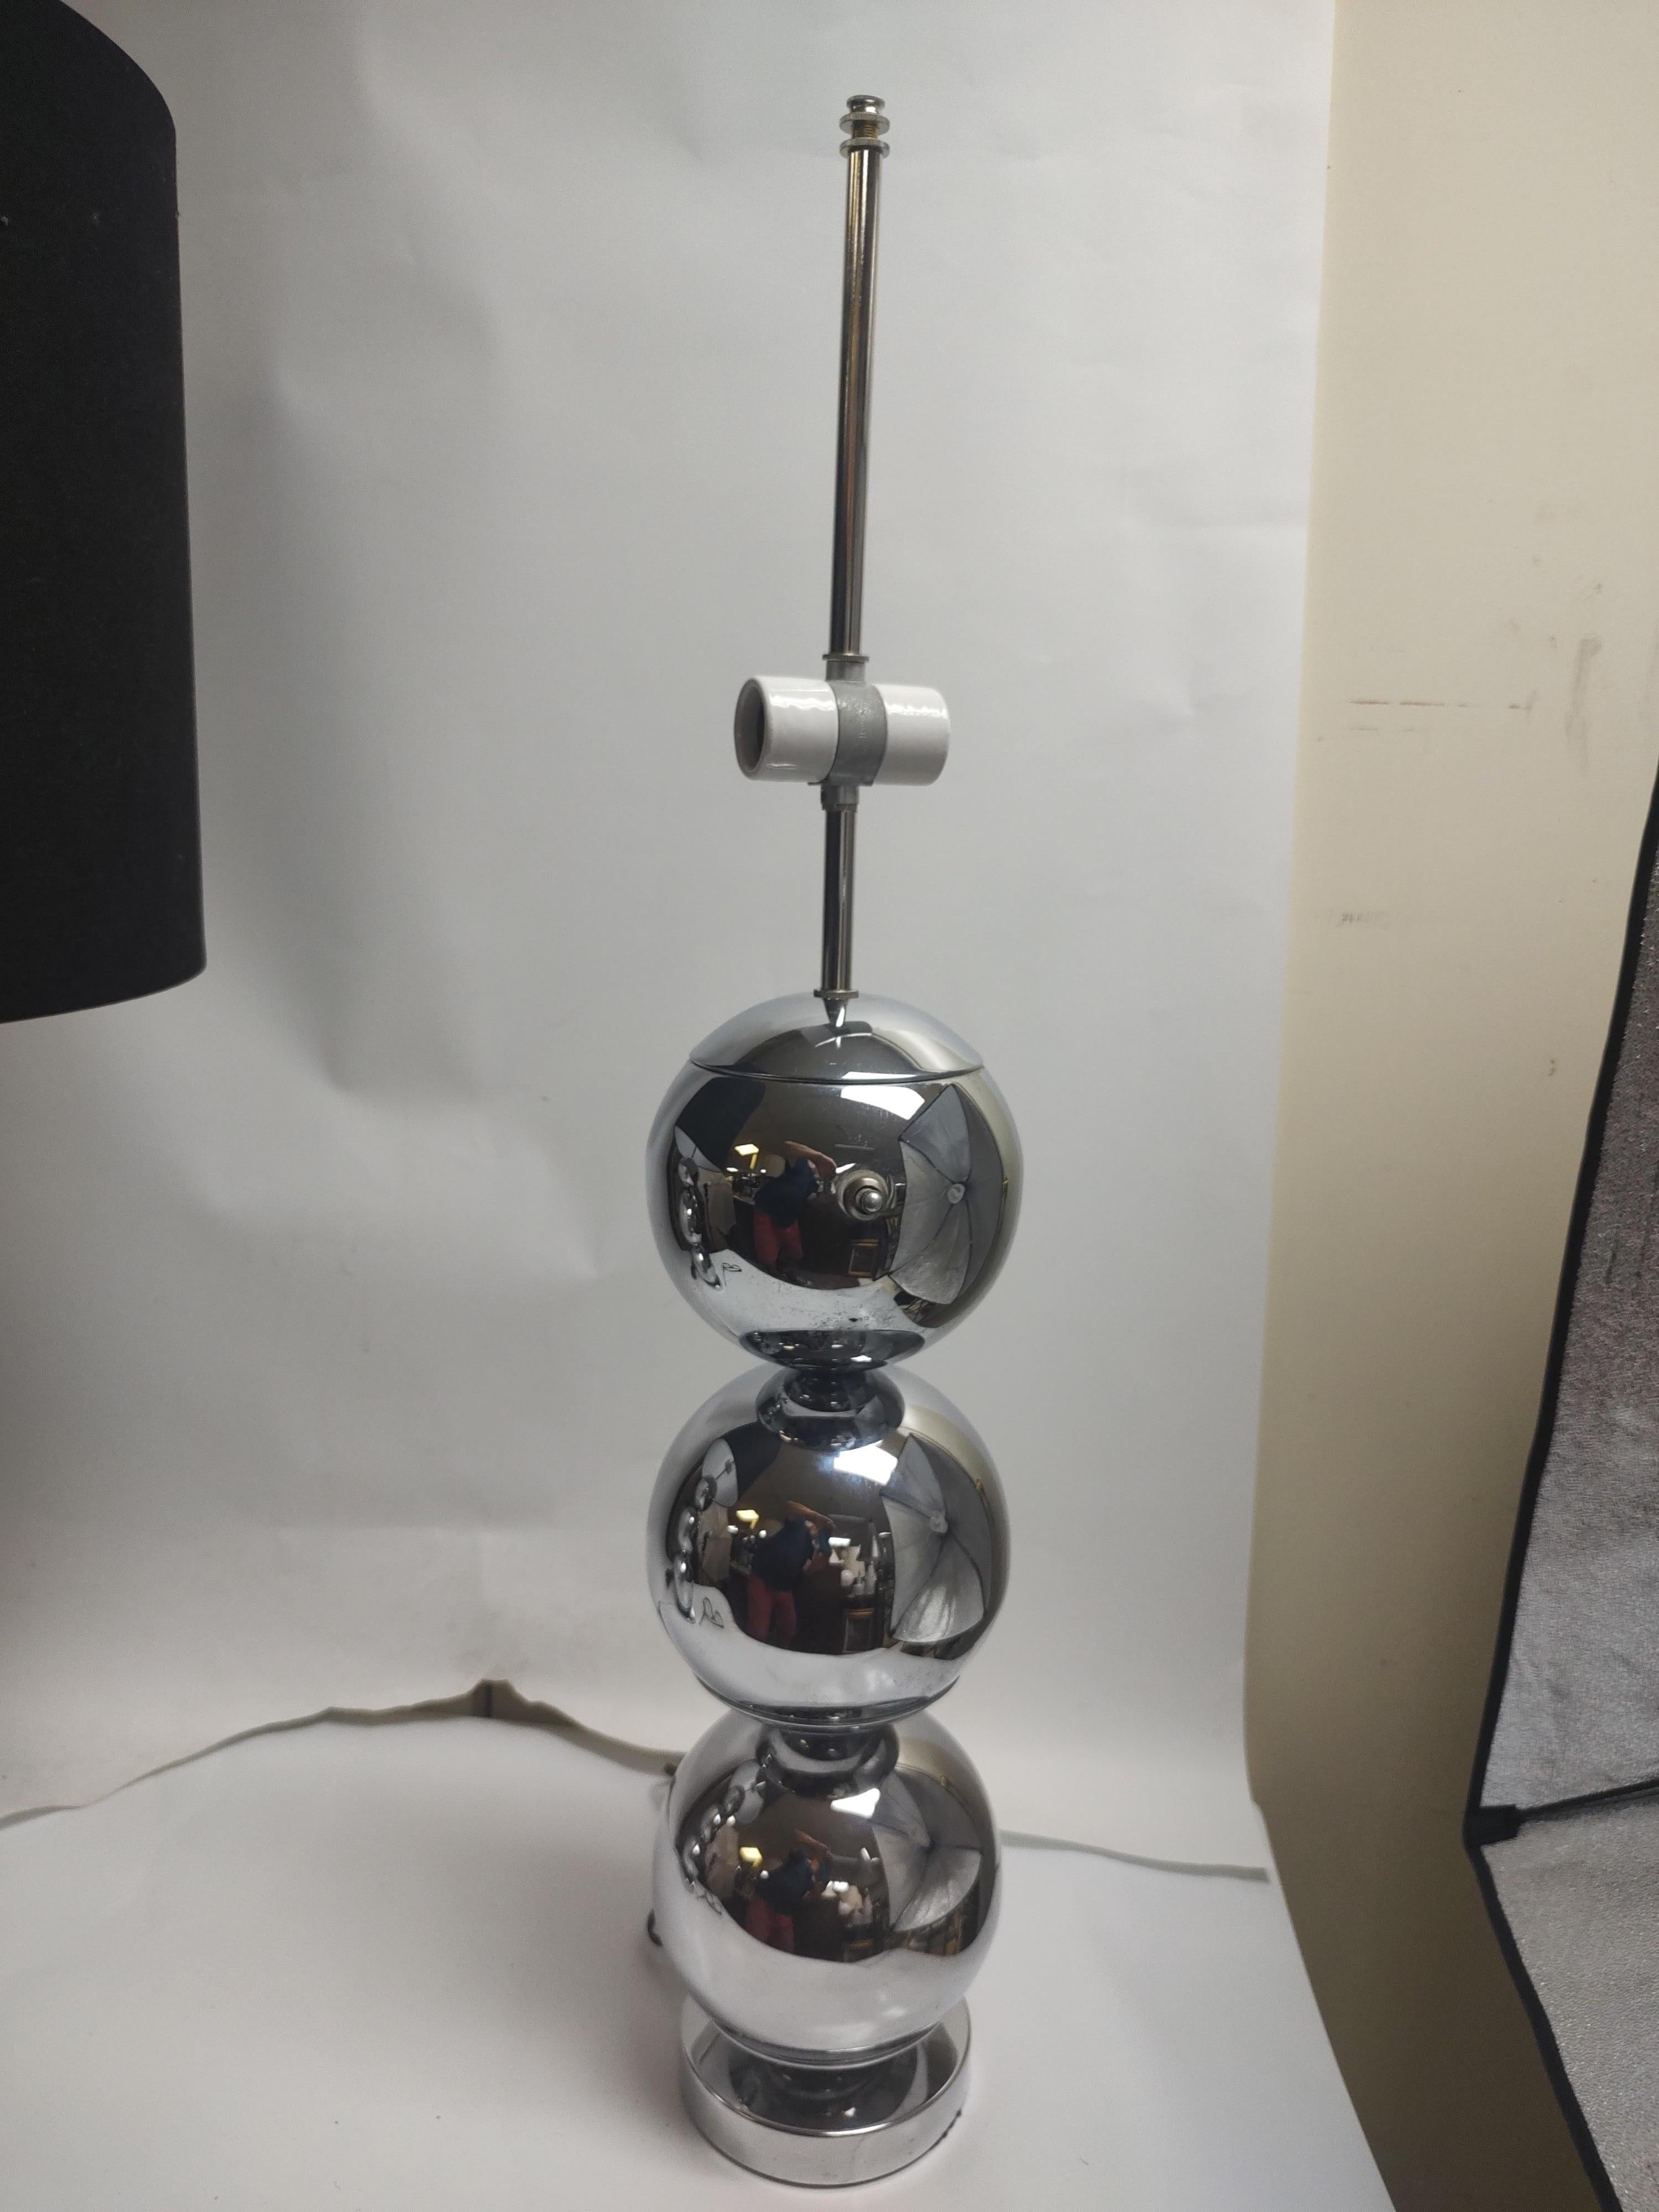 Pair of Mid-Century Modern Stacked Ball Table Lamps with New RH Shades In Good Condition For Sale In Port Jervis, NY